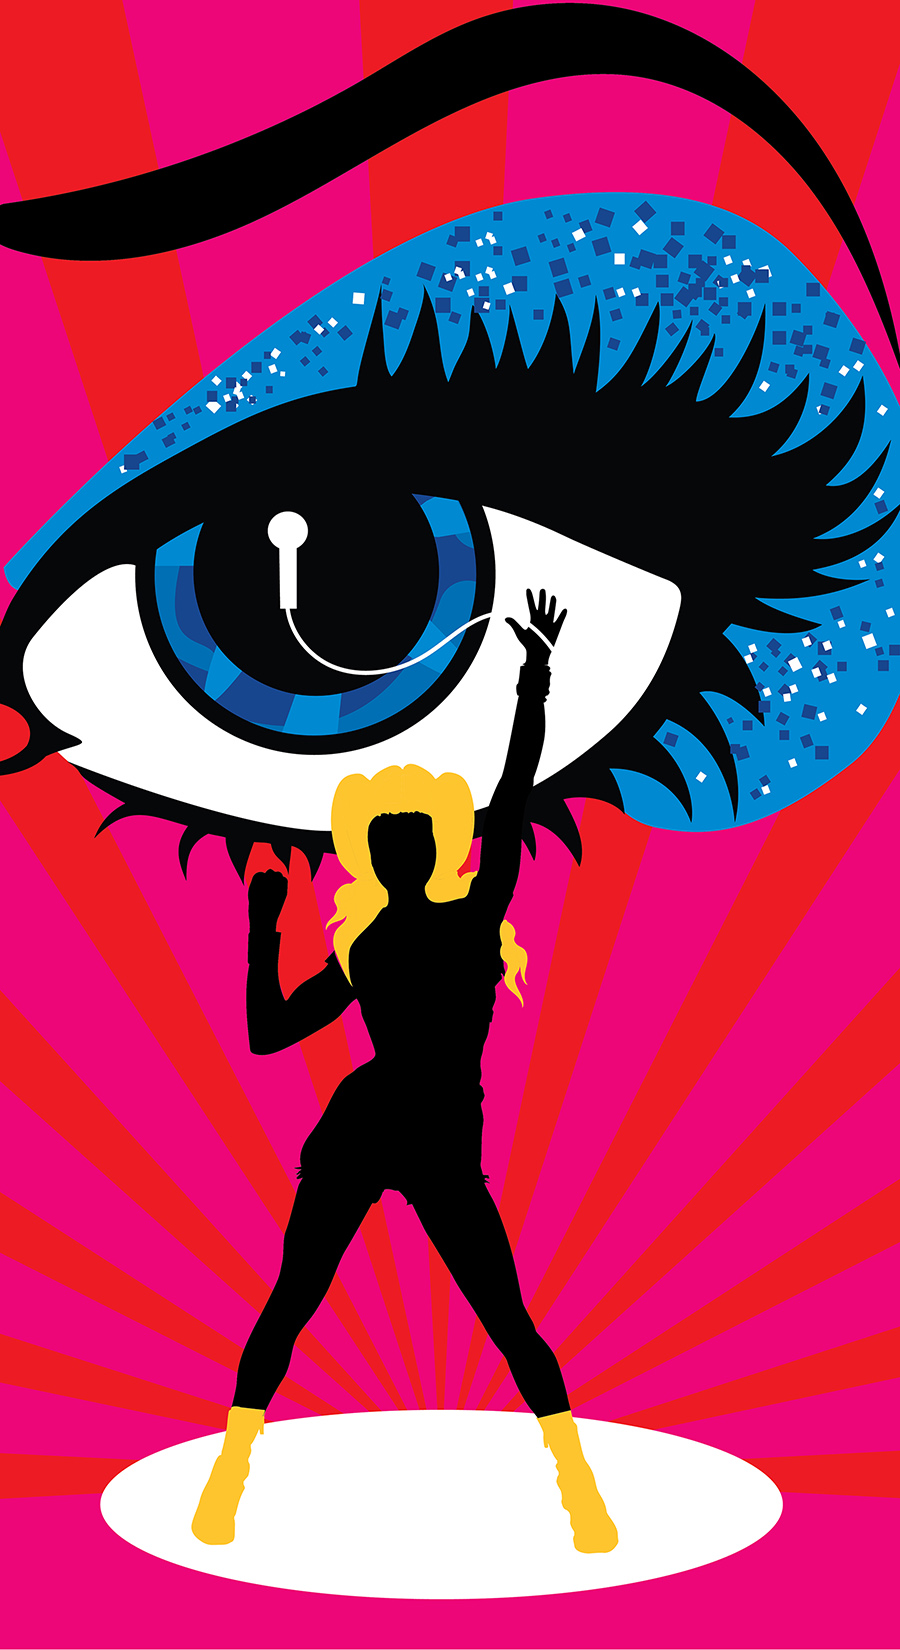 Hedwig and the Angry Inch Review